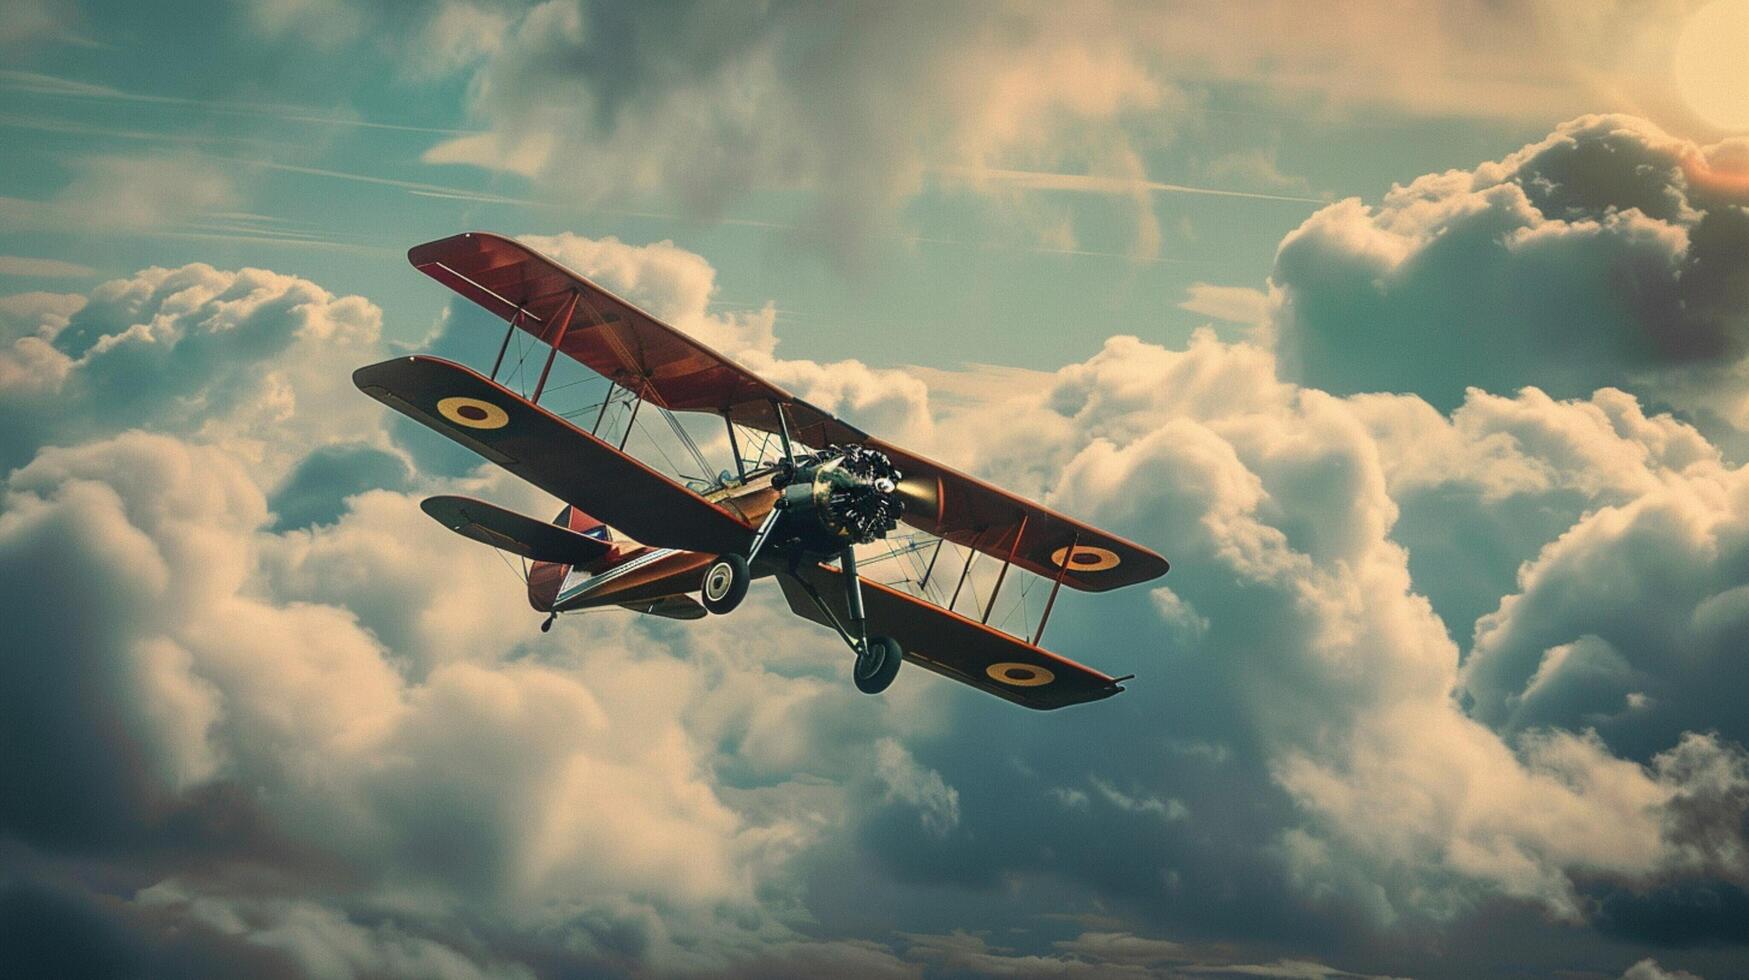 an old fashioned biplane performing a stunt photo